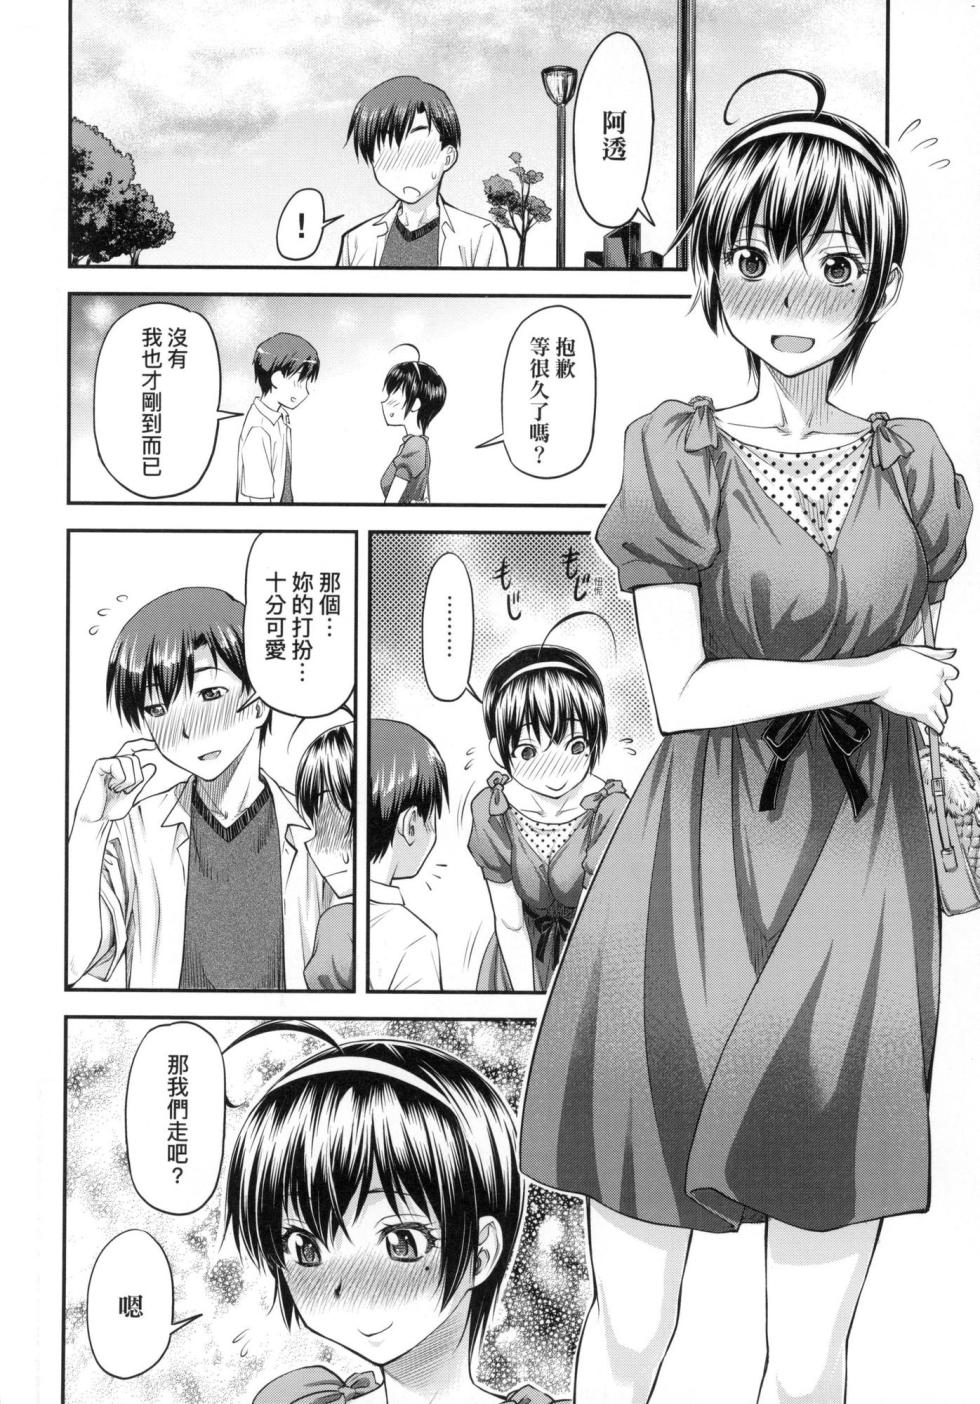 [Nagare Ippon] Kaname Date Jou | 小要開發Date 上 [Chinese] [Decensored] - Page 35